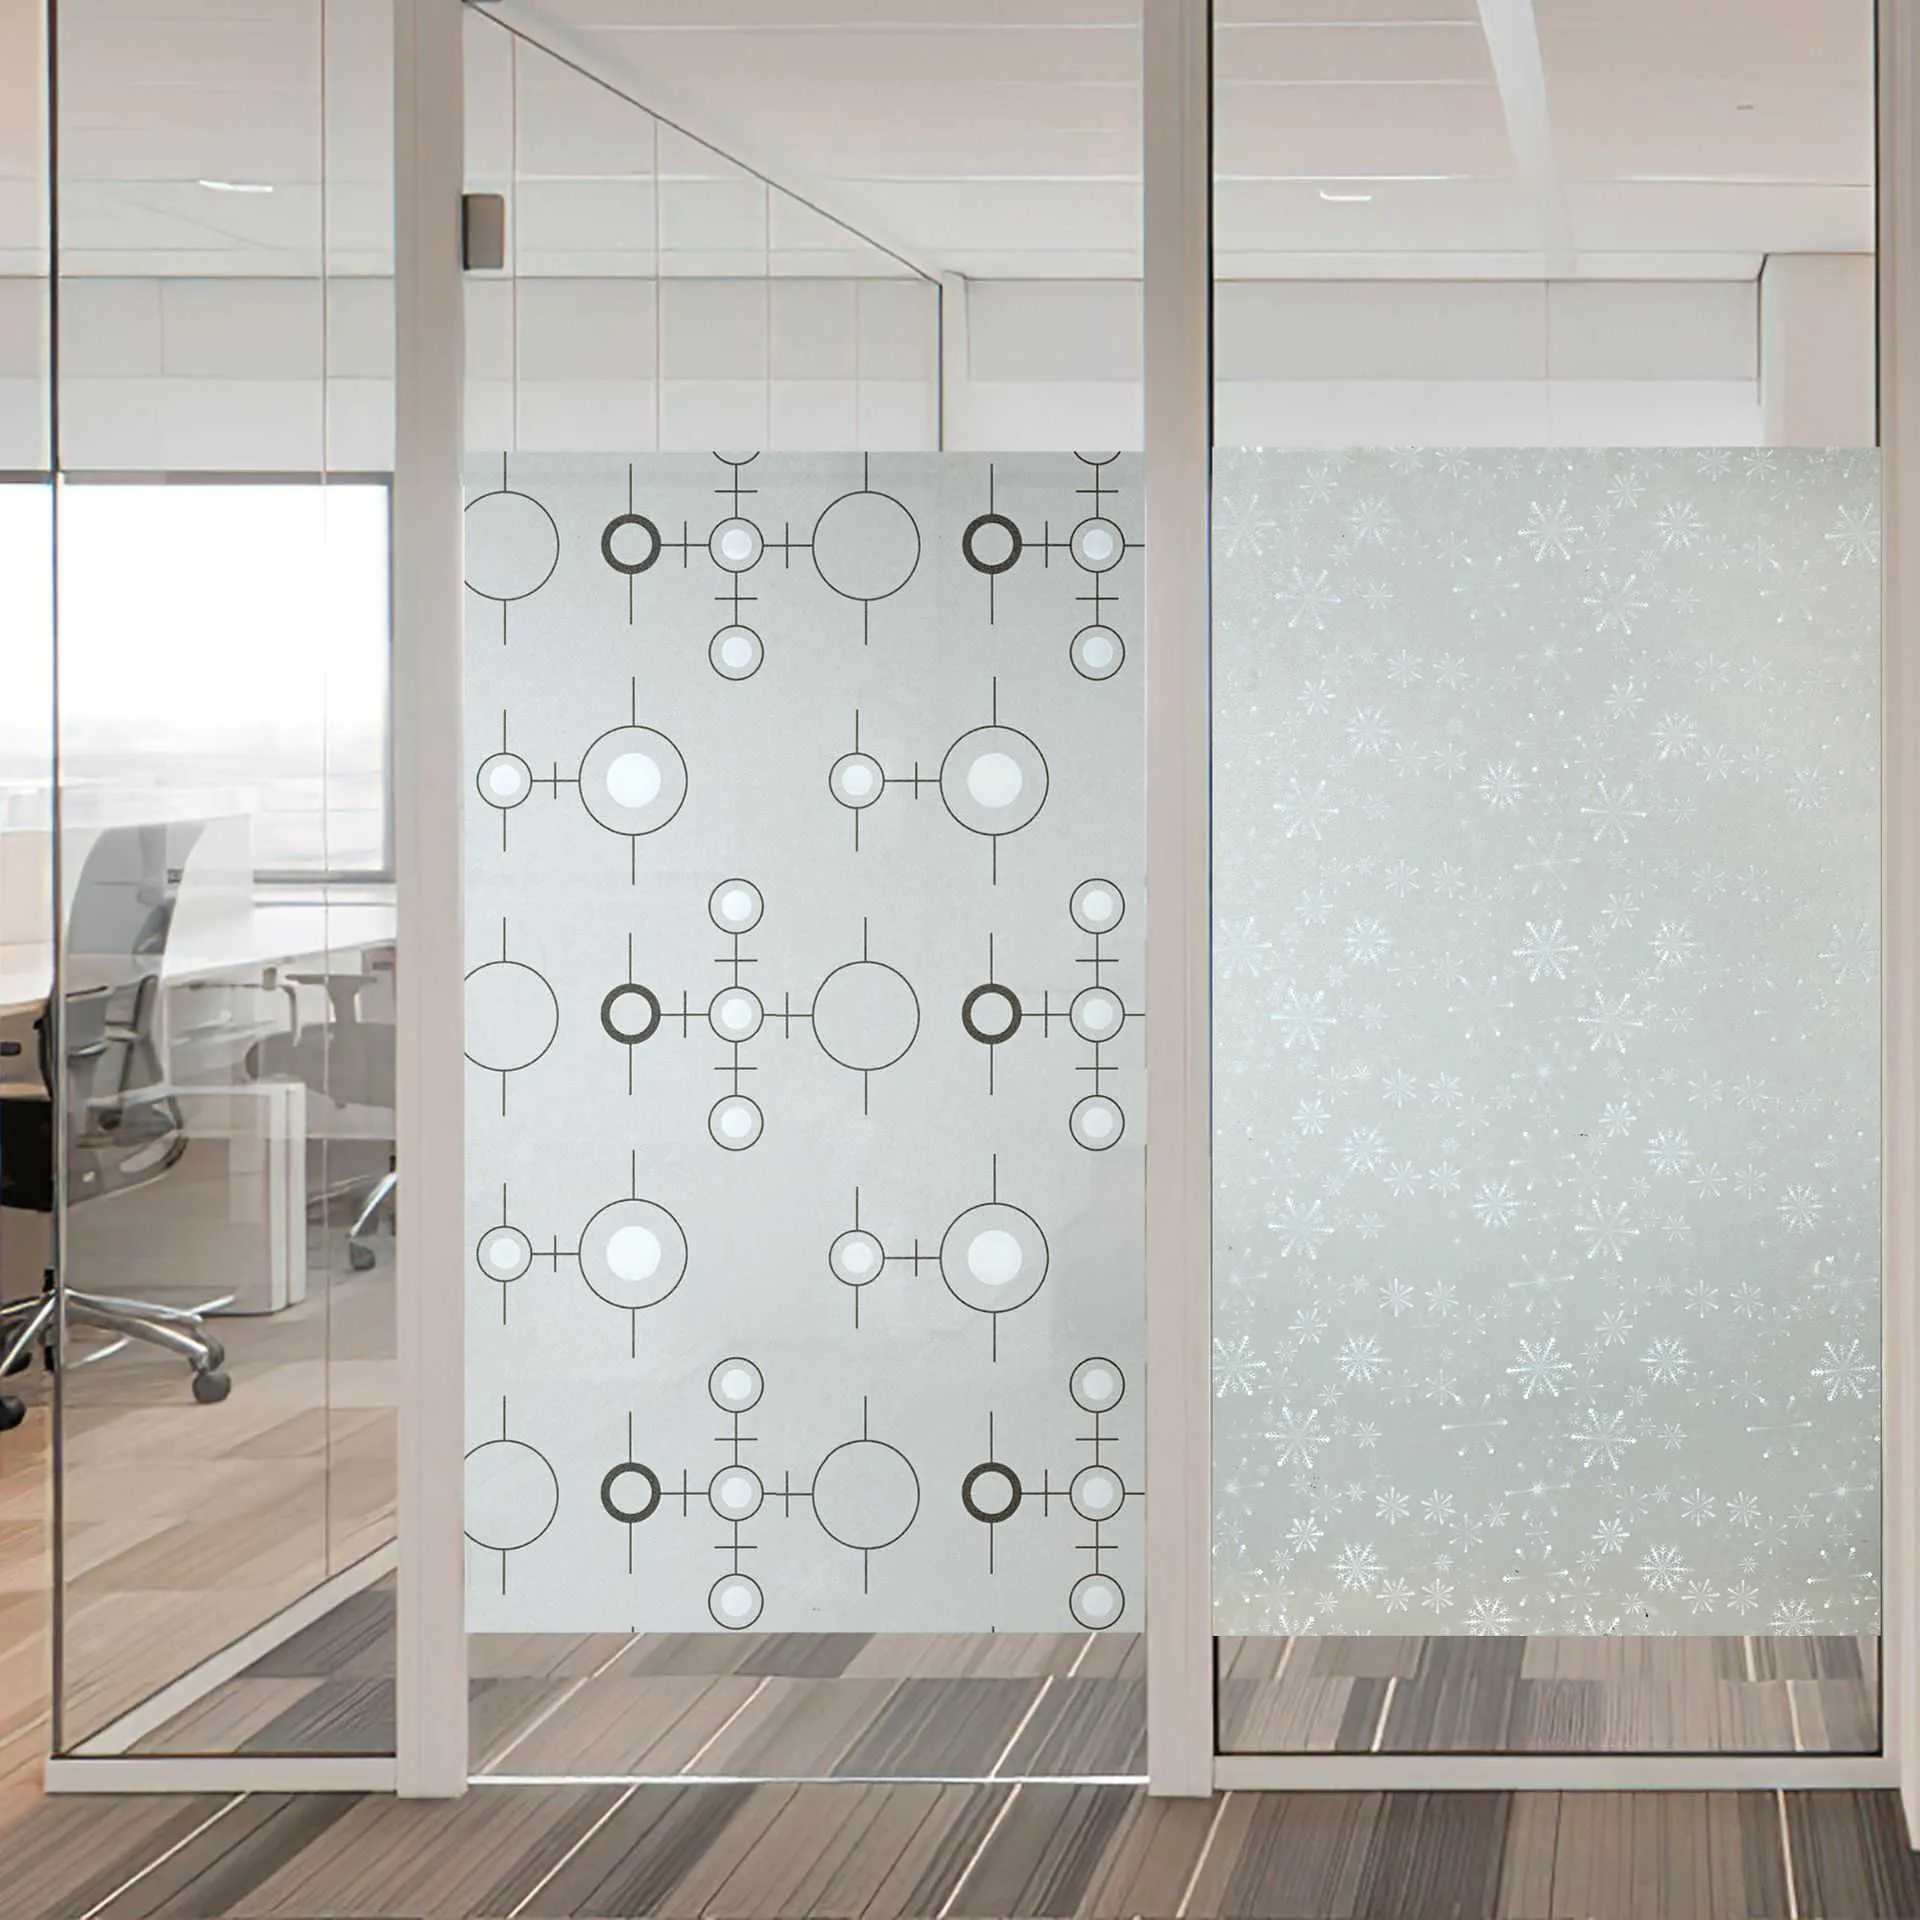 Self Adhesive Frosted Glass Privacy Sticker For Window For Privacy And Heat  Protection Ideal For Bathroom, Home, And Office R230810 From Thomas_store,  $11.41